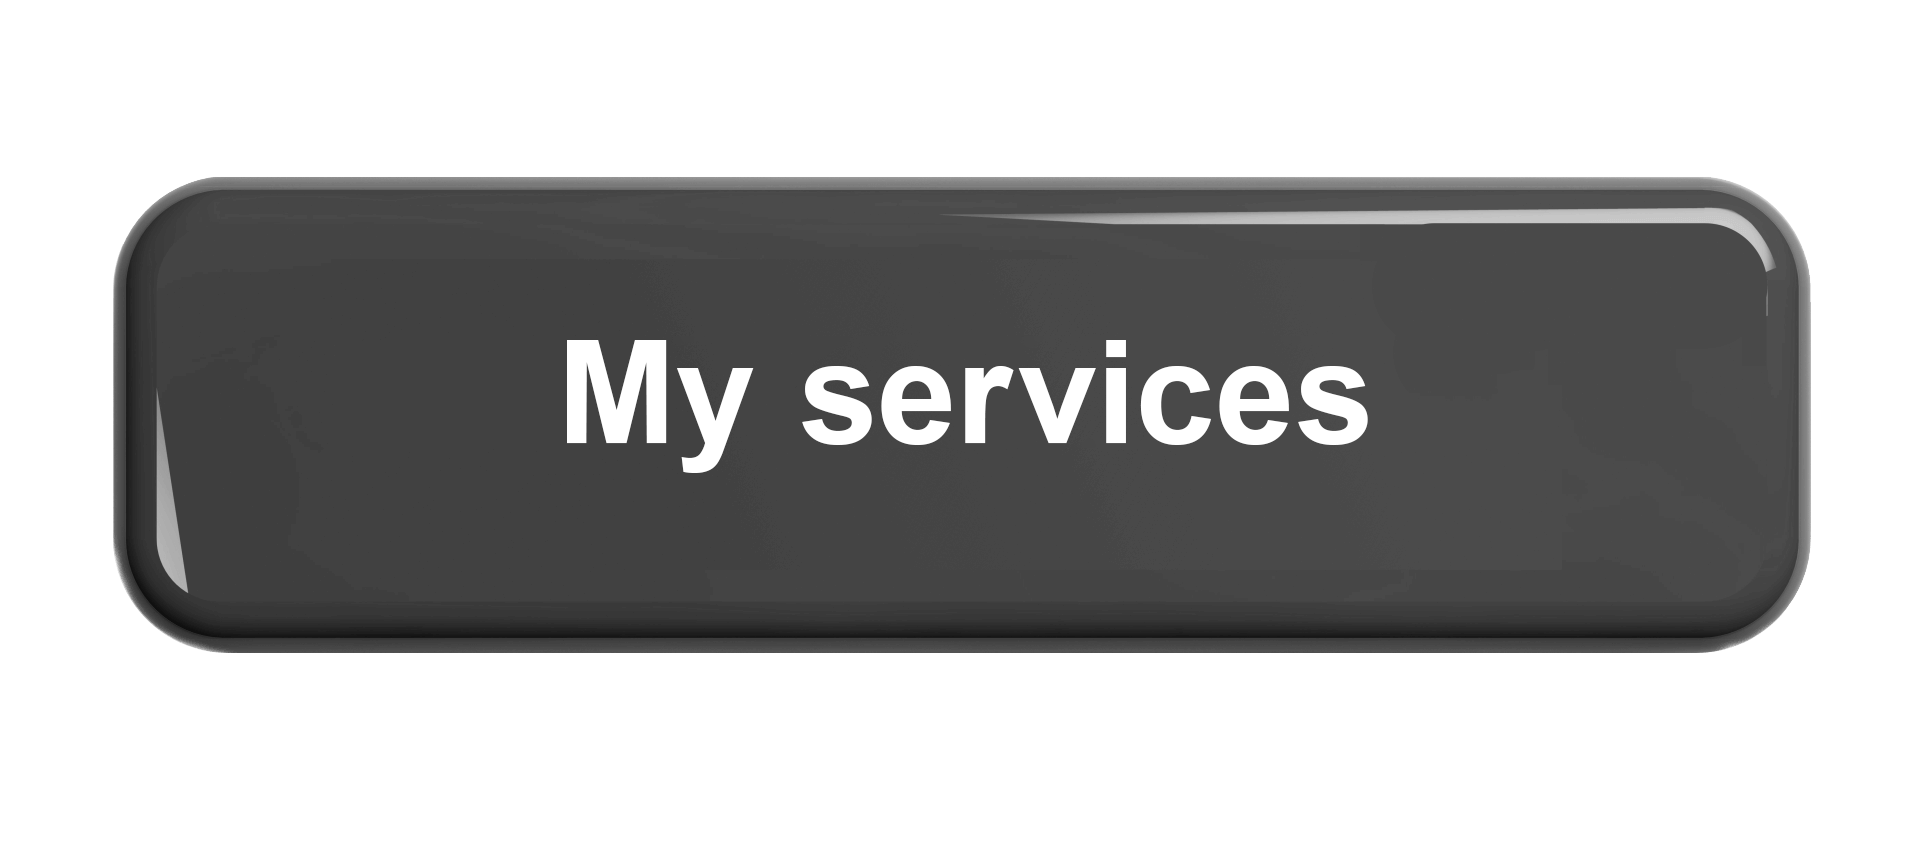 My services